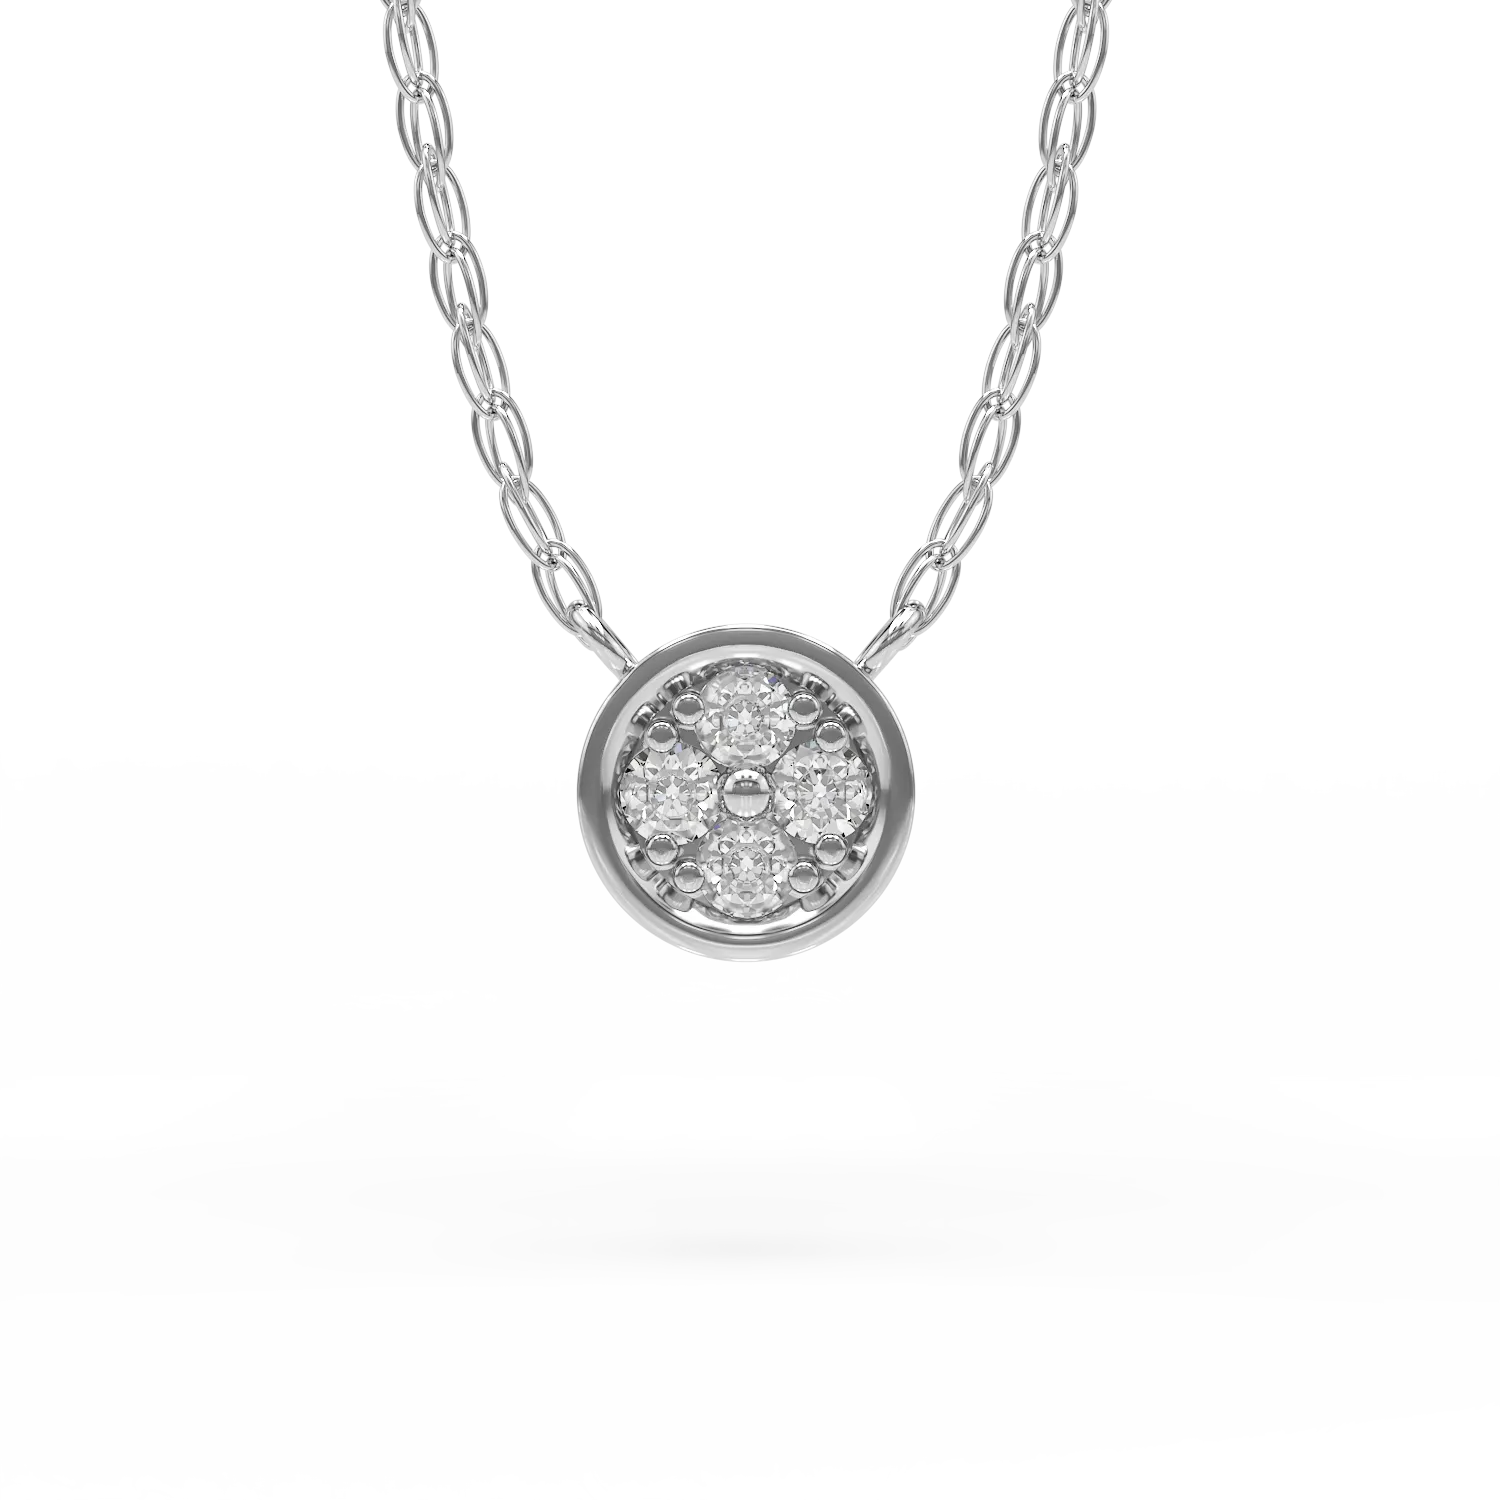 18K white gold pendant necklace with 0.08ct diamonds